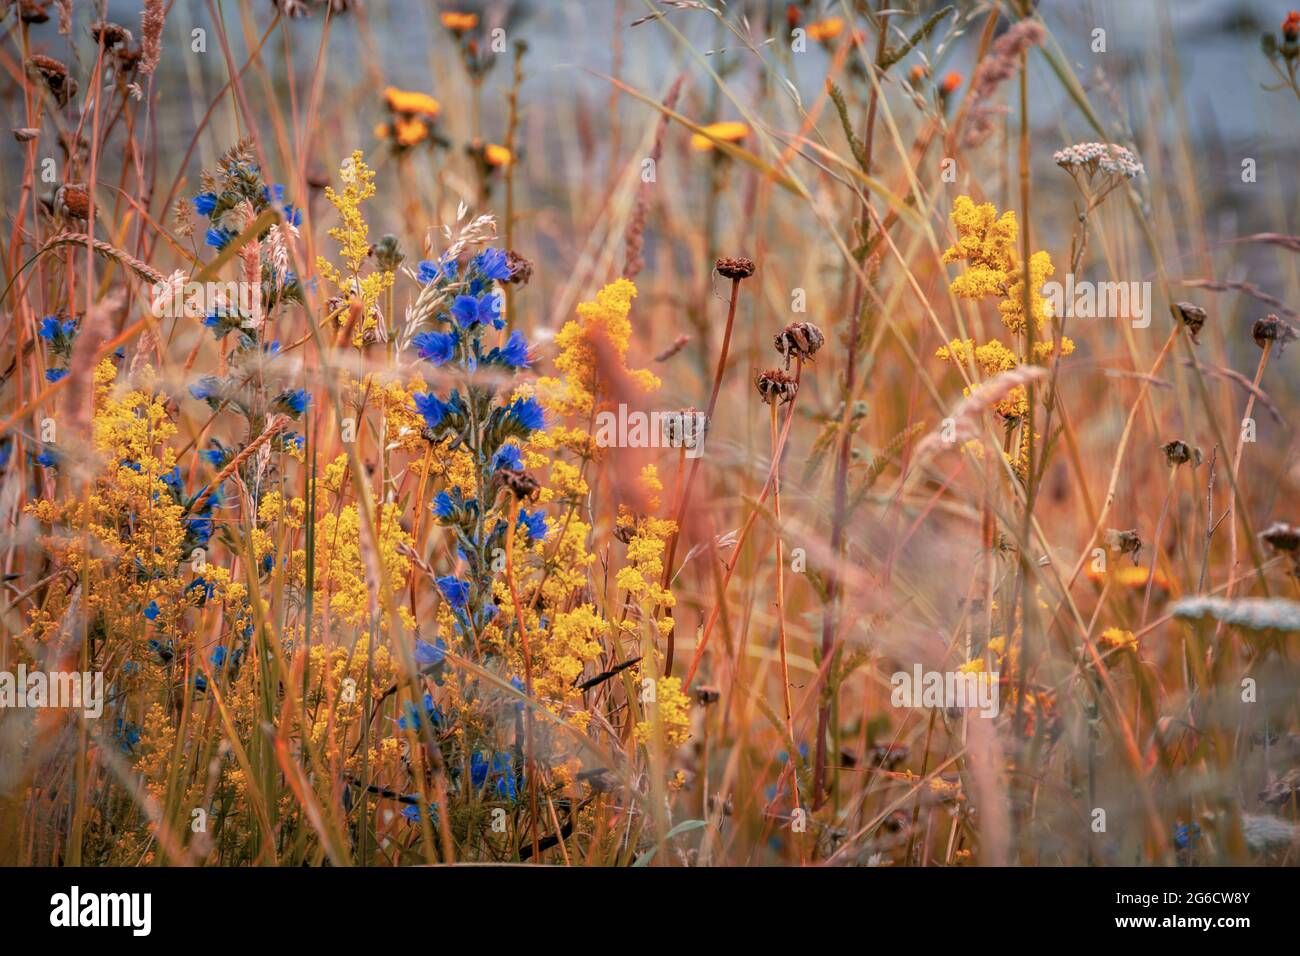 British meadow in summer with wild flowers and grasses, Viper's Bugloss, Stock Photo